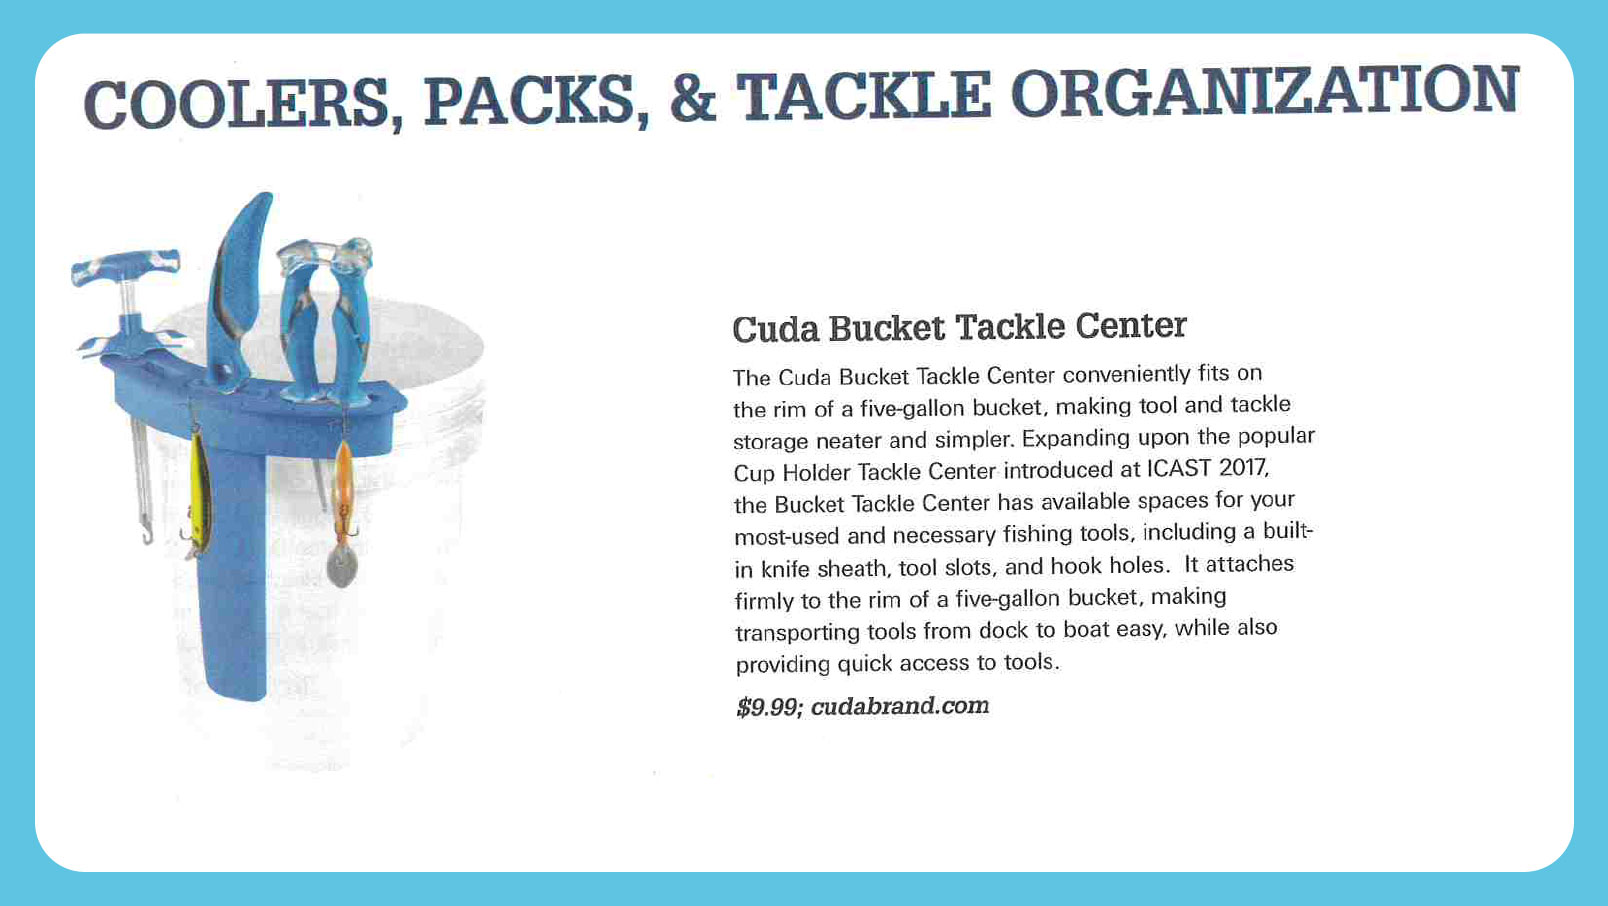 Coolers, Packs & Tackle organization - Featured in On The Water Bucket Tackle Center